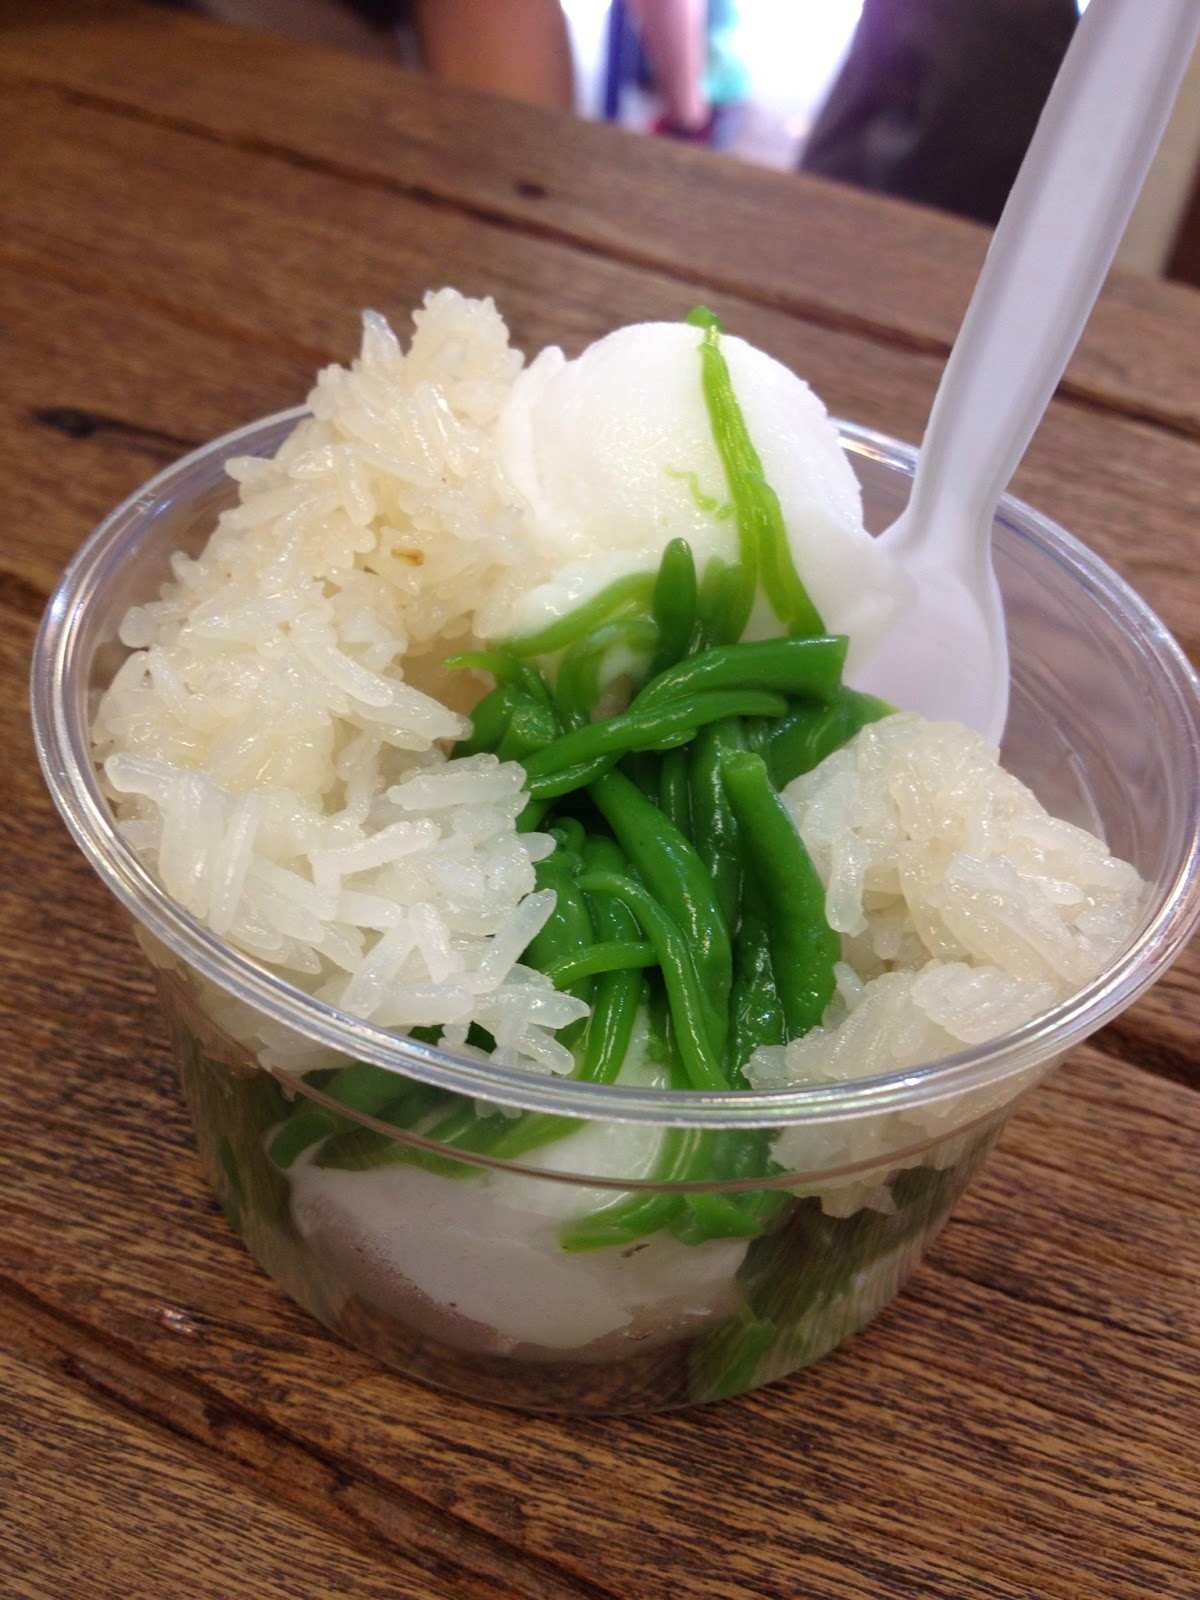 Bangkok - Coconut ice cream with sticky rice and lod chong, a tapioca flour noodle